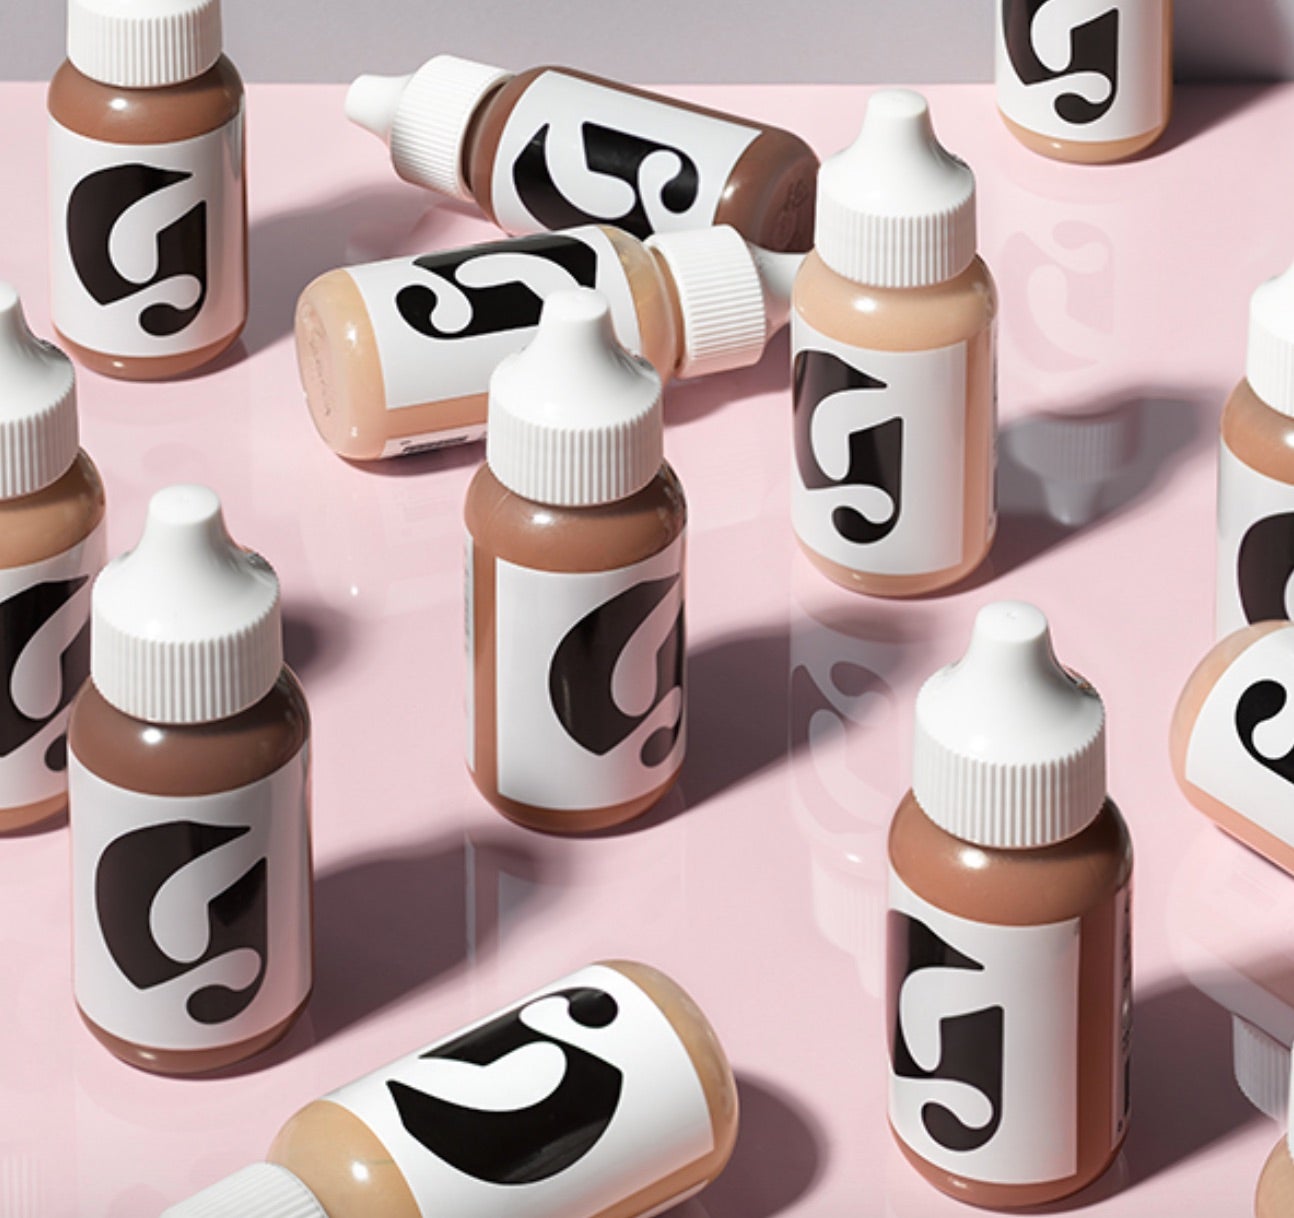 Glossier’s Perfecting Skin Tint Offers Shades for Darker Women